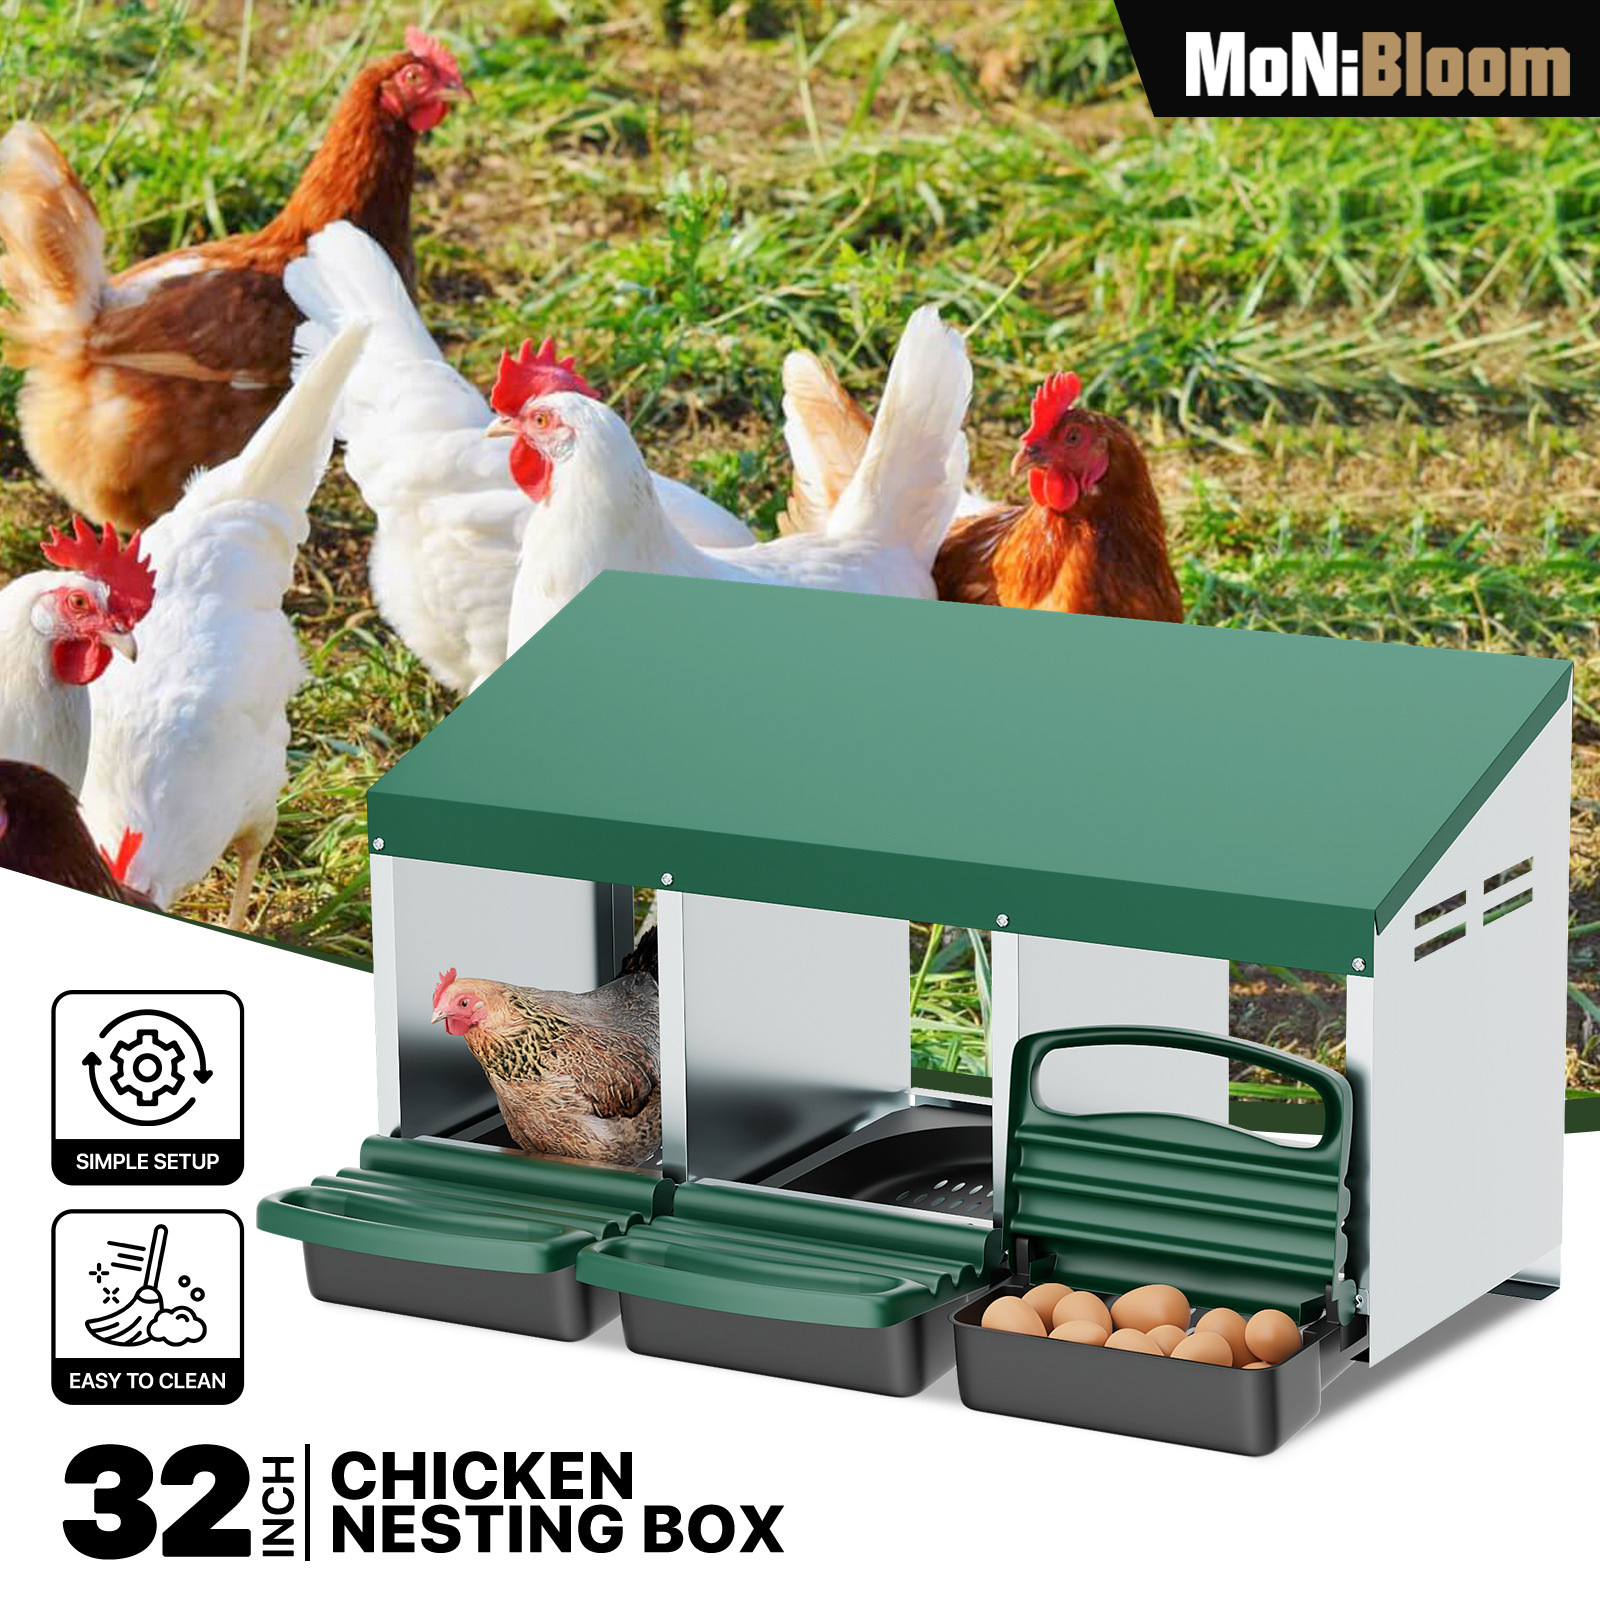 3 Holes Chicken Nesting Box Poultry Perch Brooding Box Eggs Automatic Collection